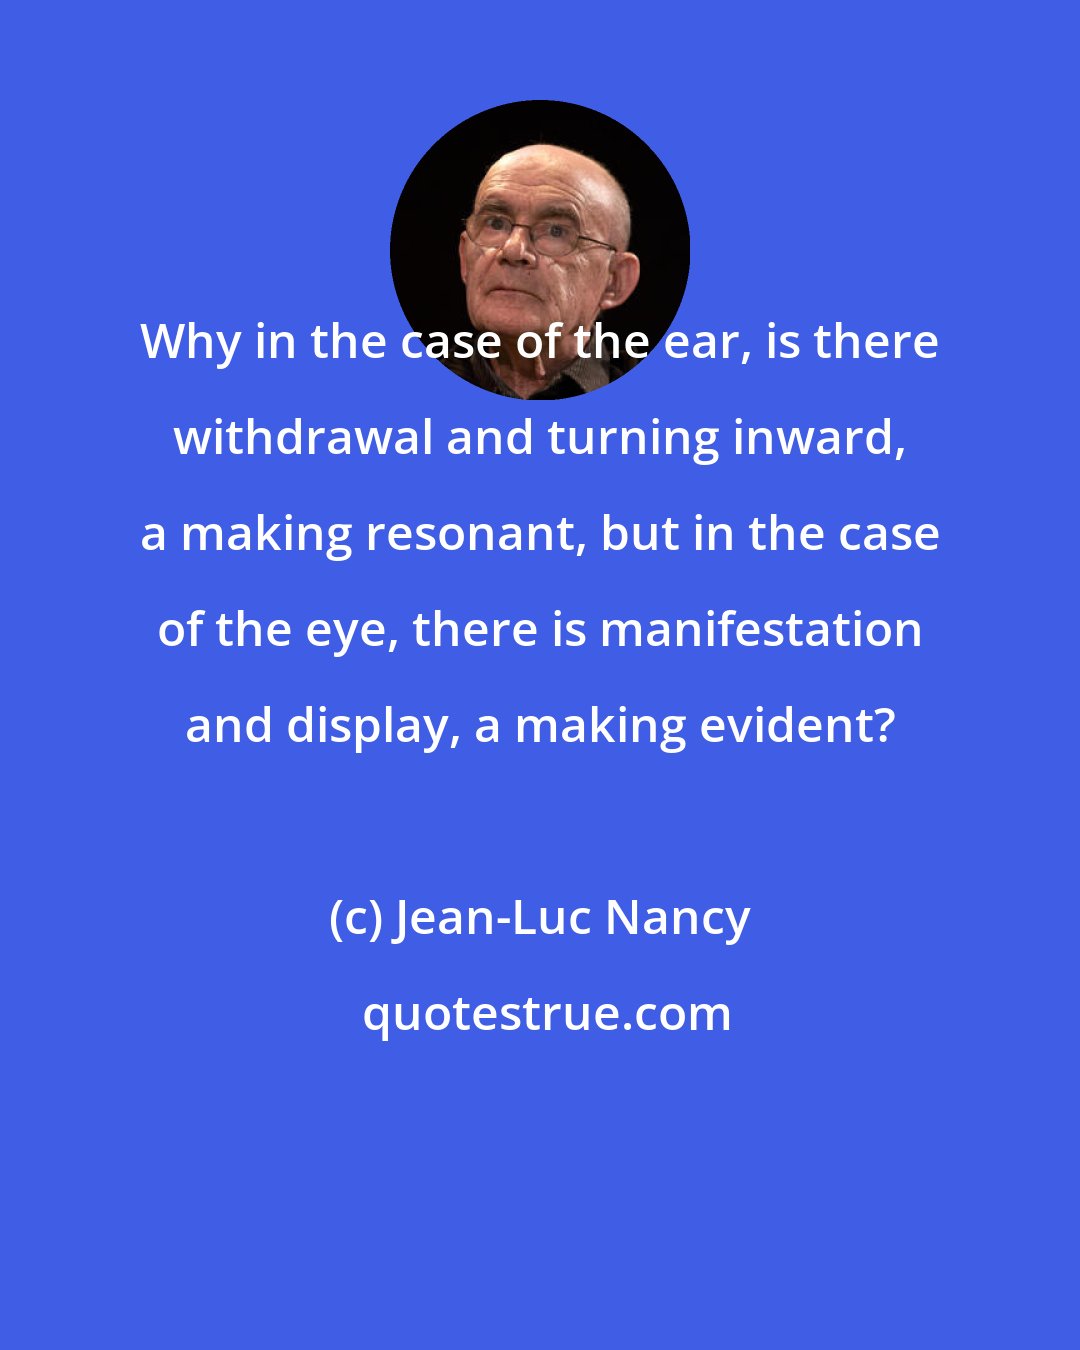 Jean-Luc Nancy: Why in the case of the ear, is there withdrawal and turning inward, a making resonant, but in the case of the eye, there is manifestation and display, a making evident?